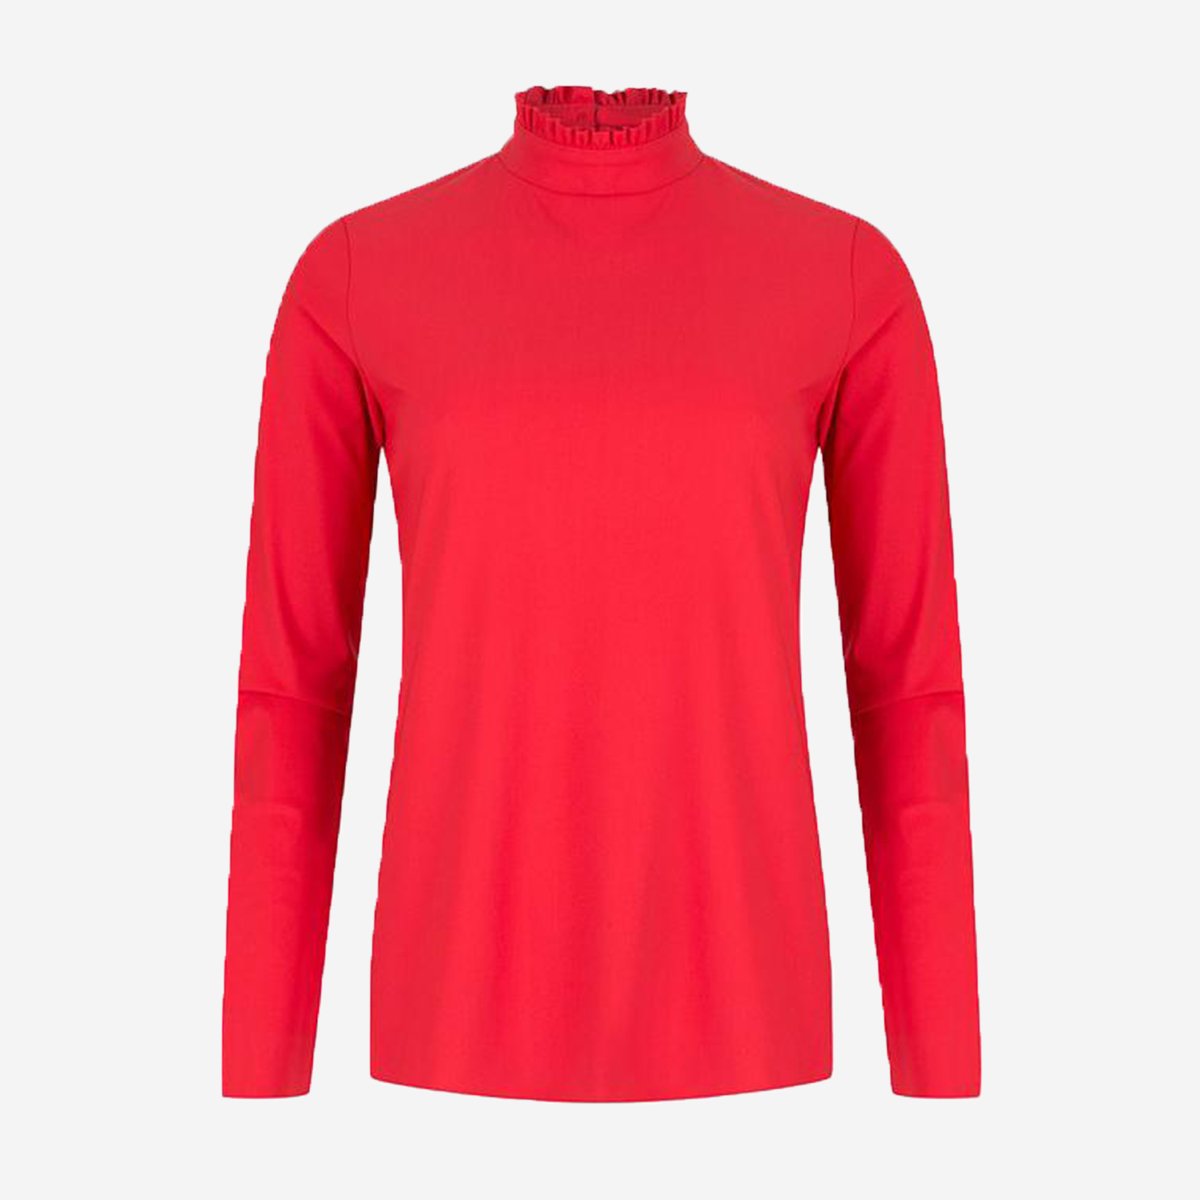 FITTED RED TURTLENECK TOP